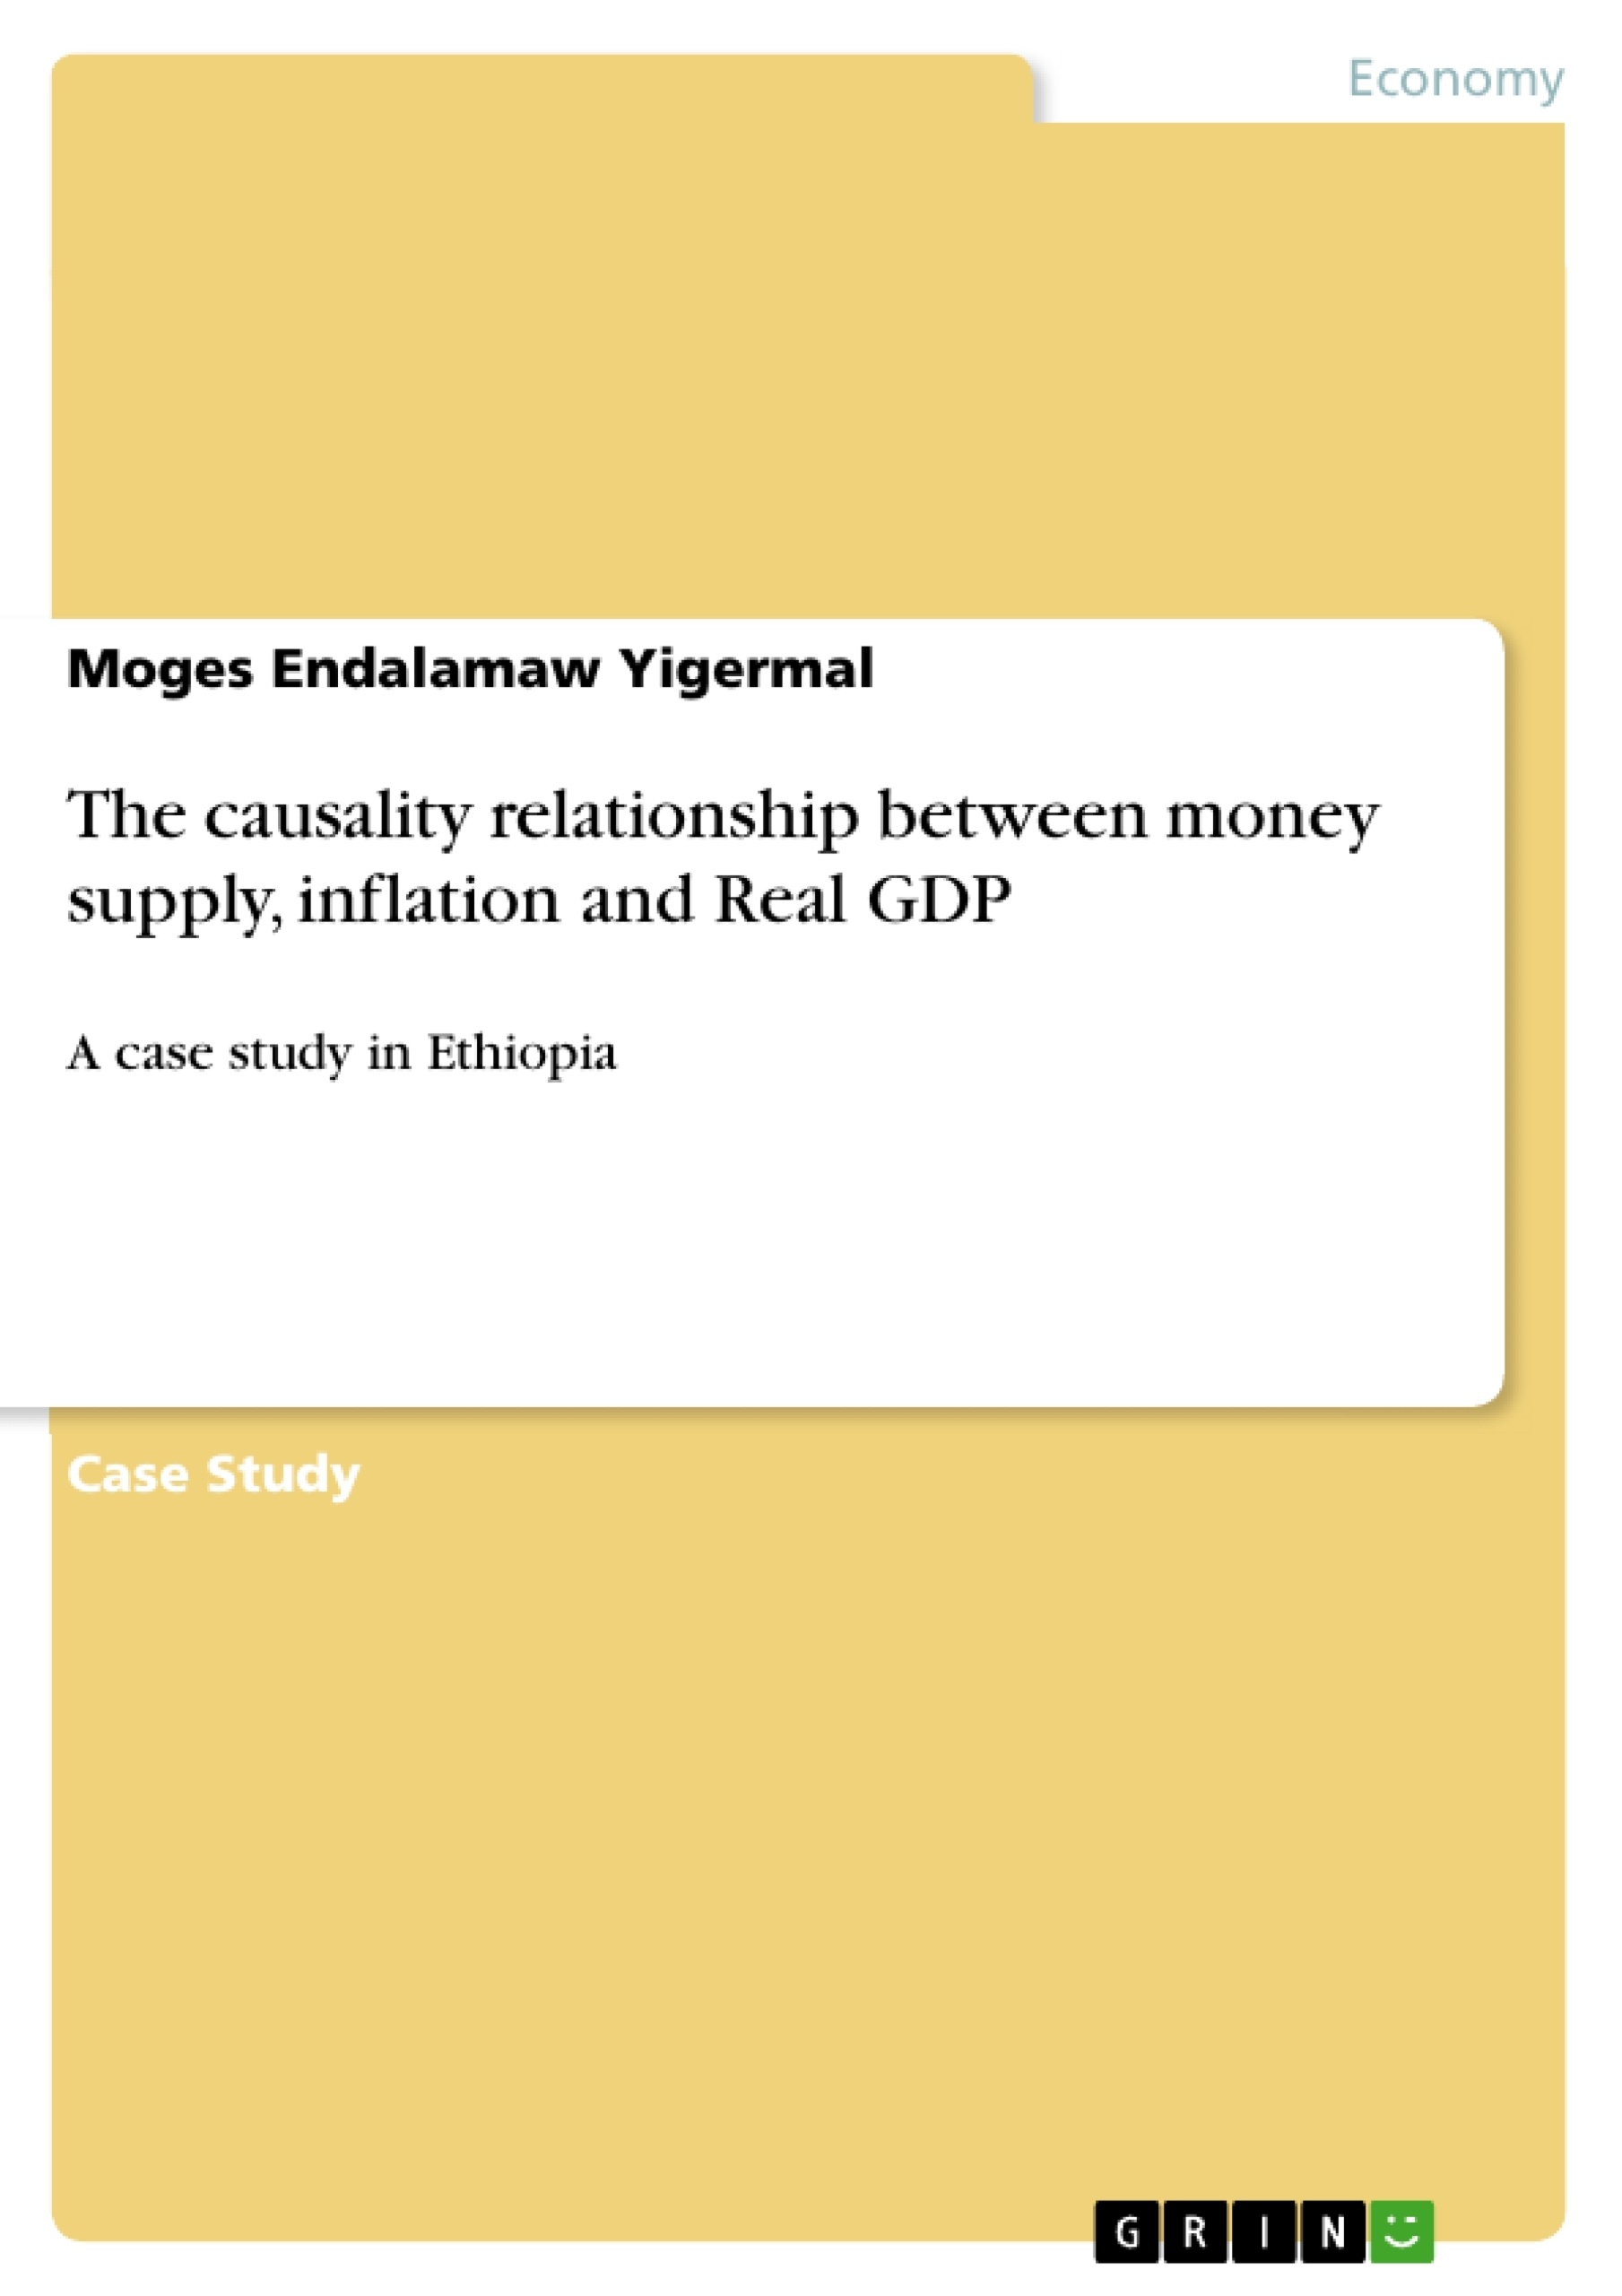 Titel: The causality relationship between money supply, inflation and Real GDP